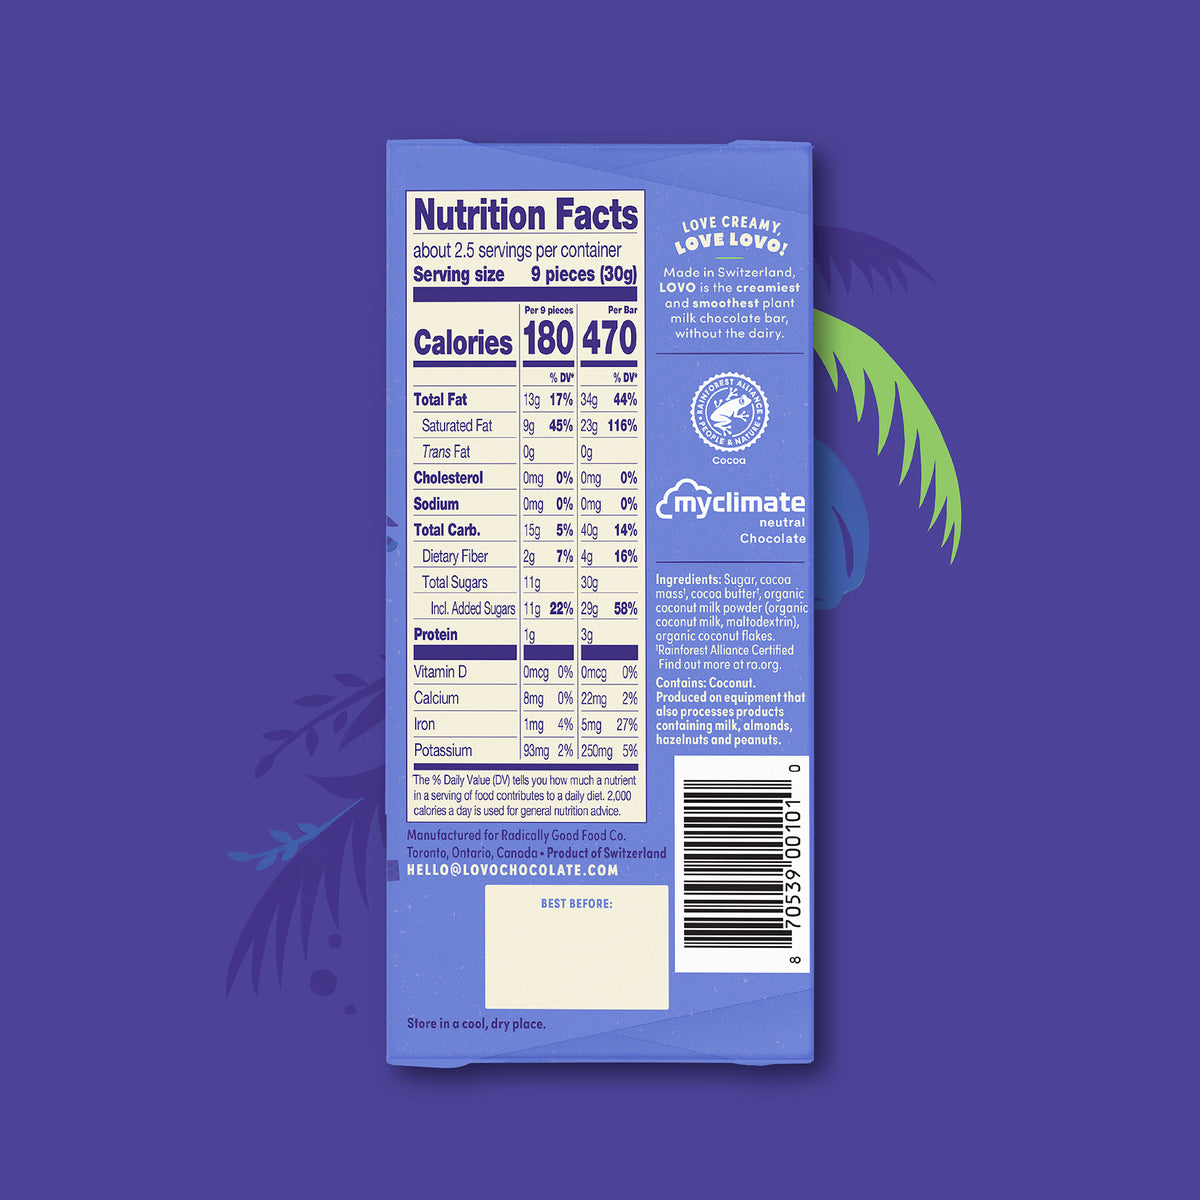 Lovo coconut milk chocolate nutrition facts on back of wrapper